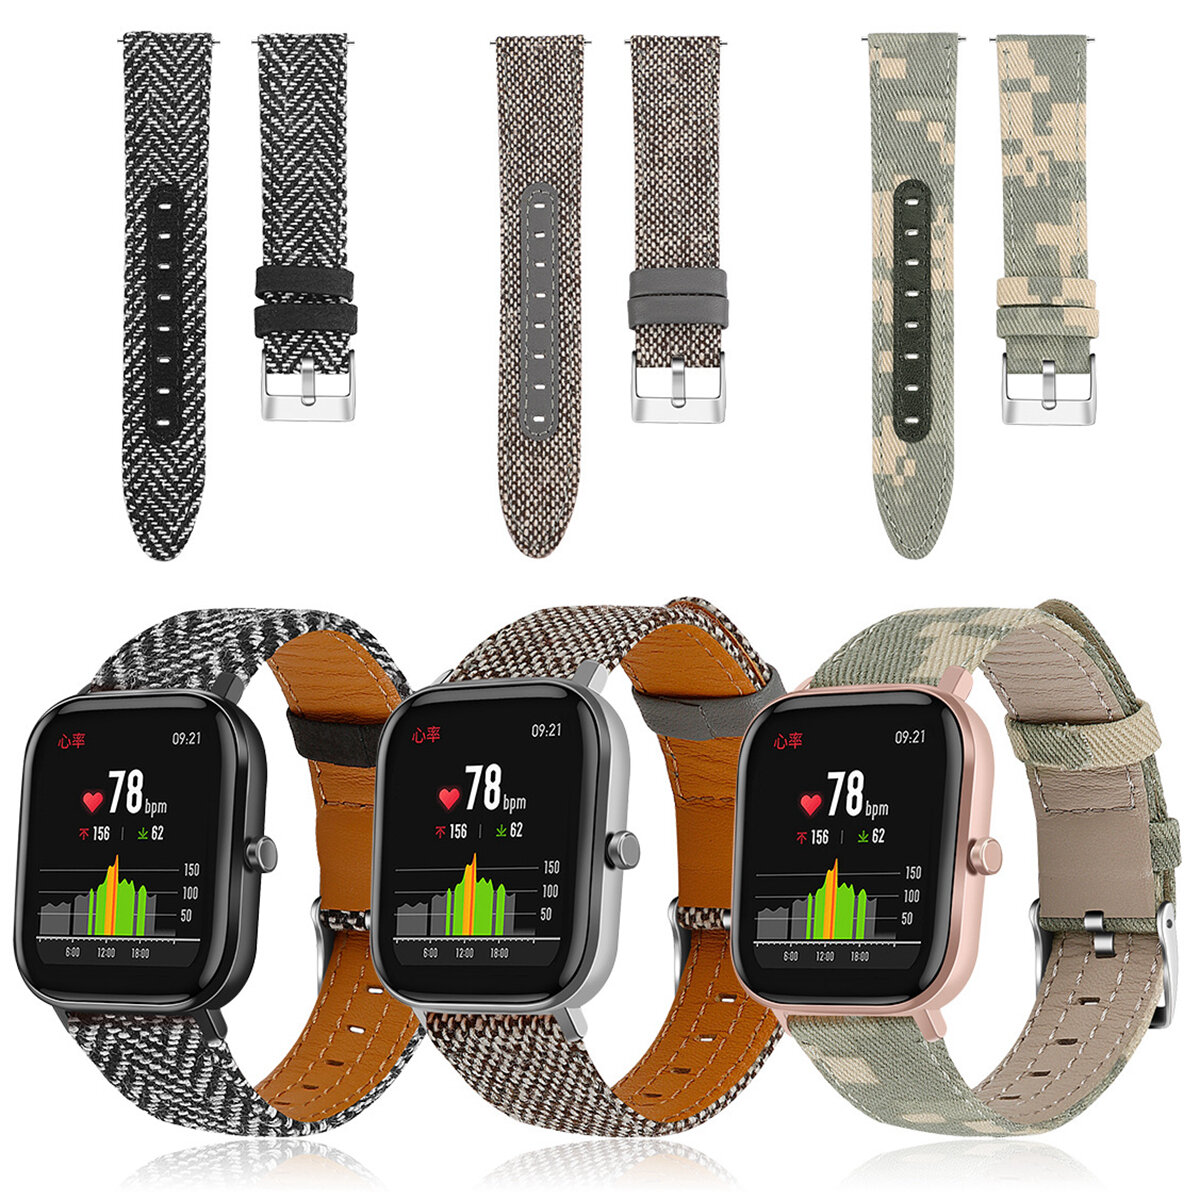 

Bakeey 20mm Universal Nylon Camouflage Canvas Watch Band for Amazfit GTS Samsung Galaxy 42/46/Active